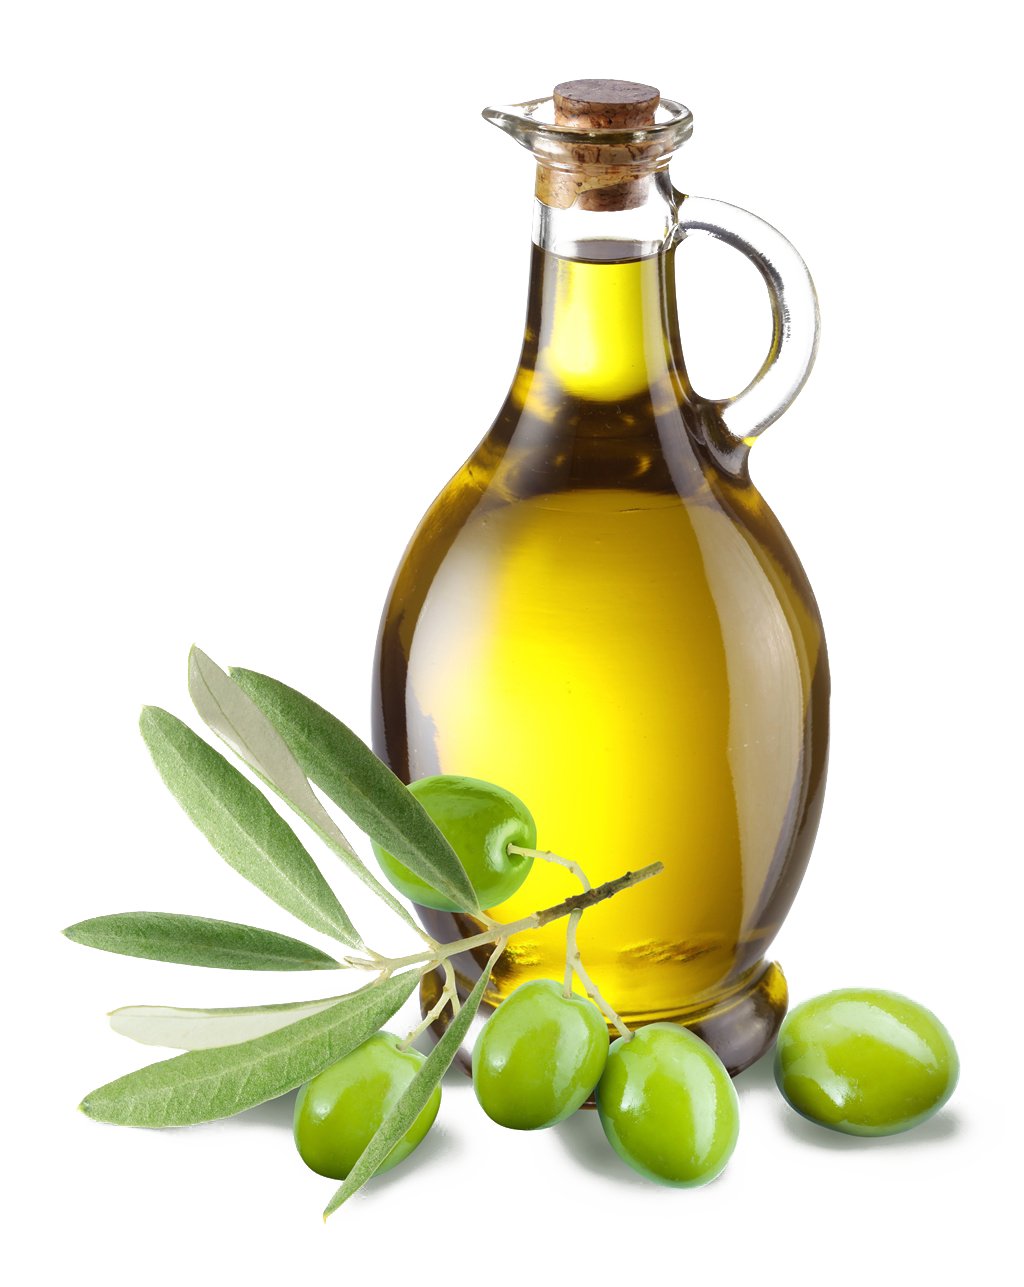 A bottle of olive oil. Olive Oil масло оливковое. Олив Ойл масло оливковое. Масло оливковое natural Olive Oil. Масло оливы, жожоба оливы.